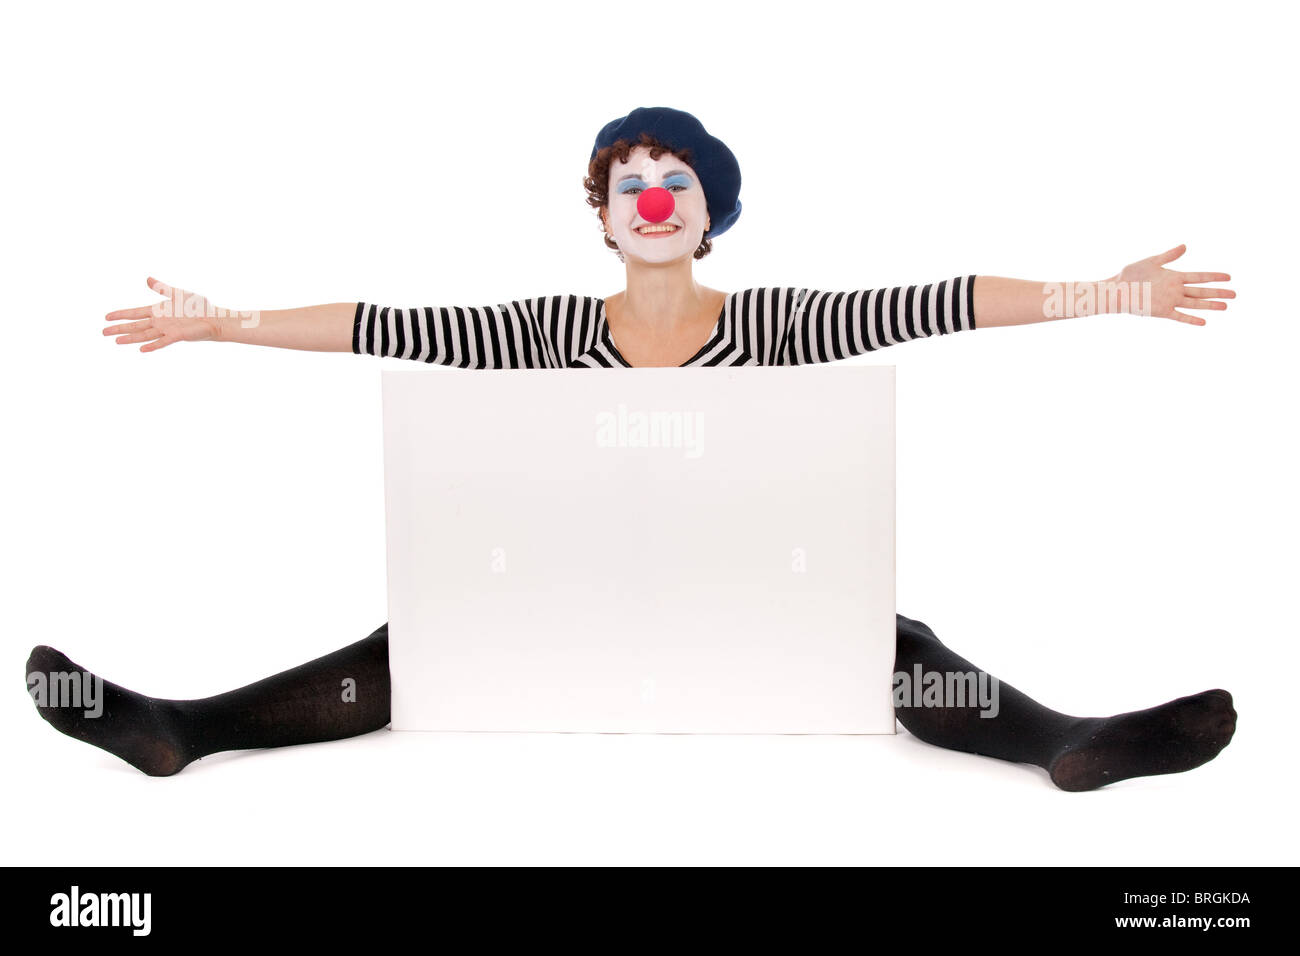 cheerful clown woman seated on floor and presenting white billboard Stock Photo